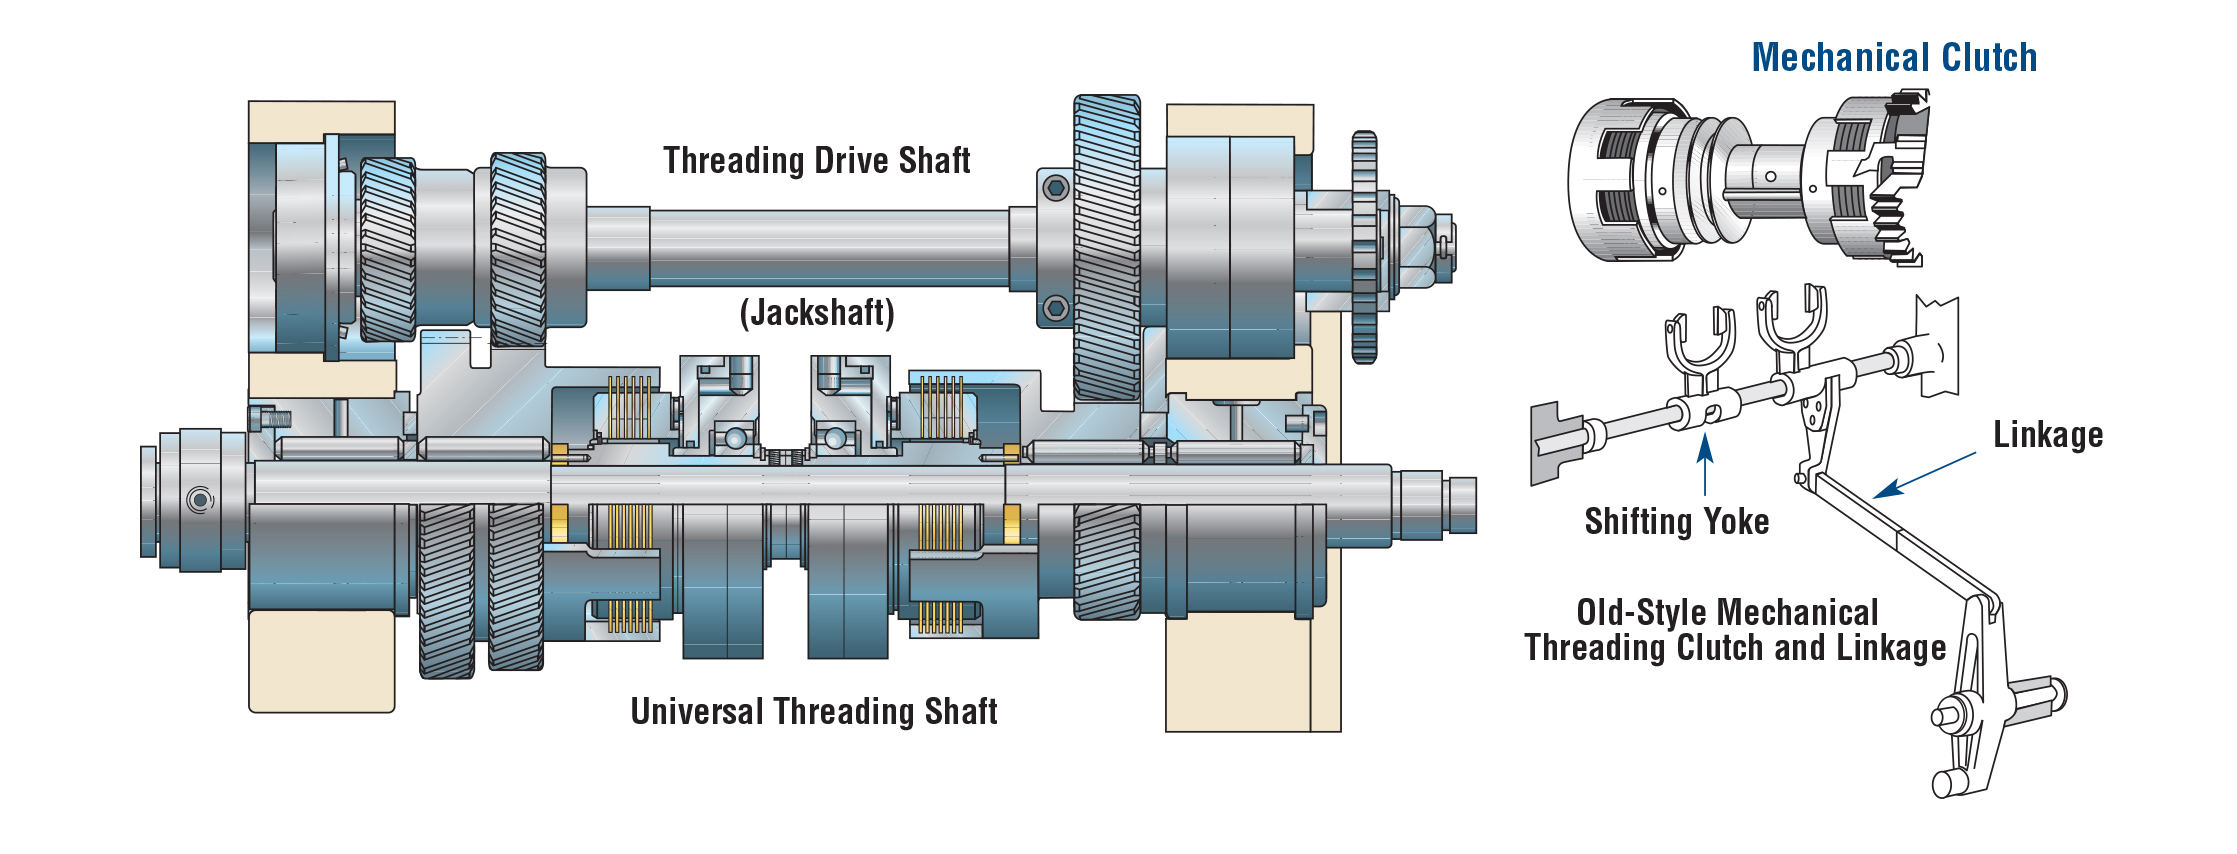 Cut-away view of a Logan Hi-Capacity Air Threading Clutch for a 1-1/4 RA-6 Acme-Gridley. Utilizes existing drive cups, (clutch gears) and shaft. Fits within existing old style mechanical clutch envelope and transmits 85% more torque.